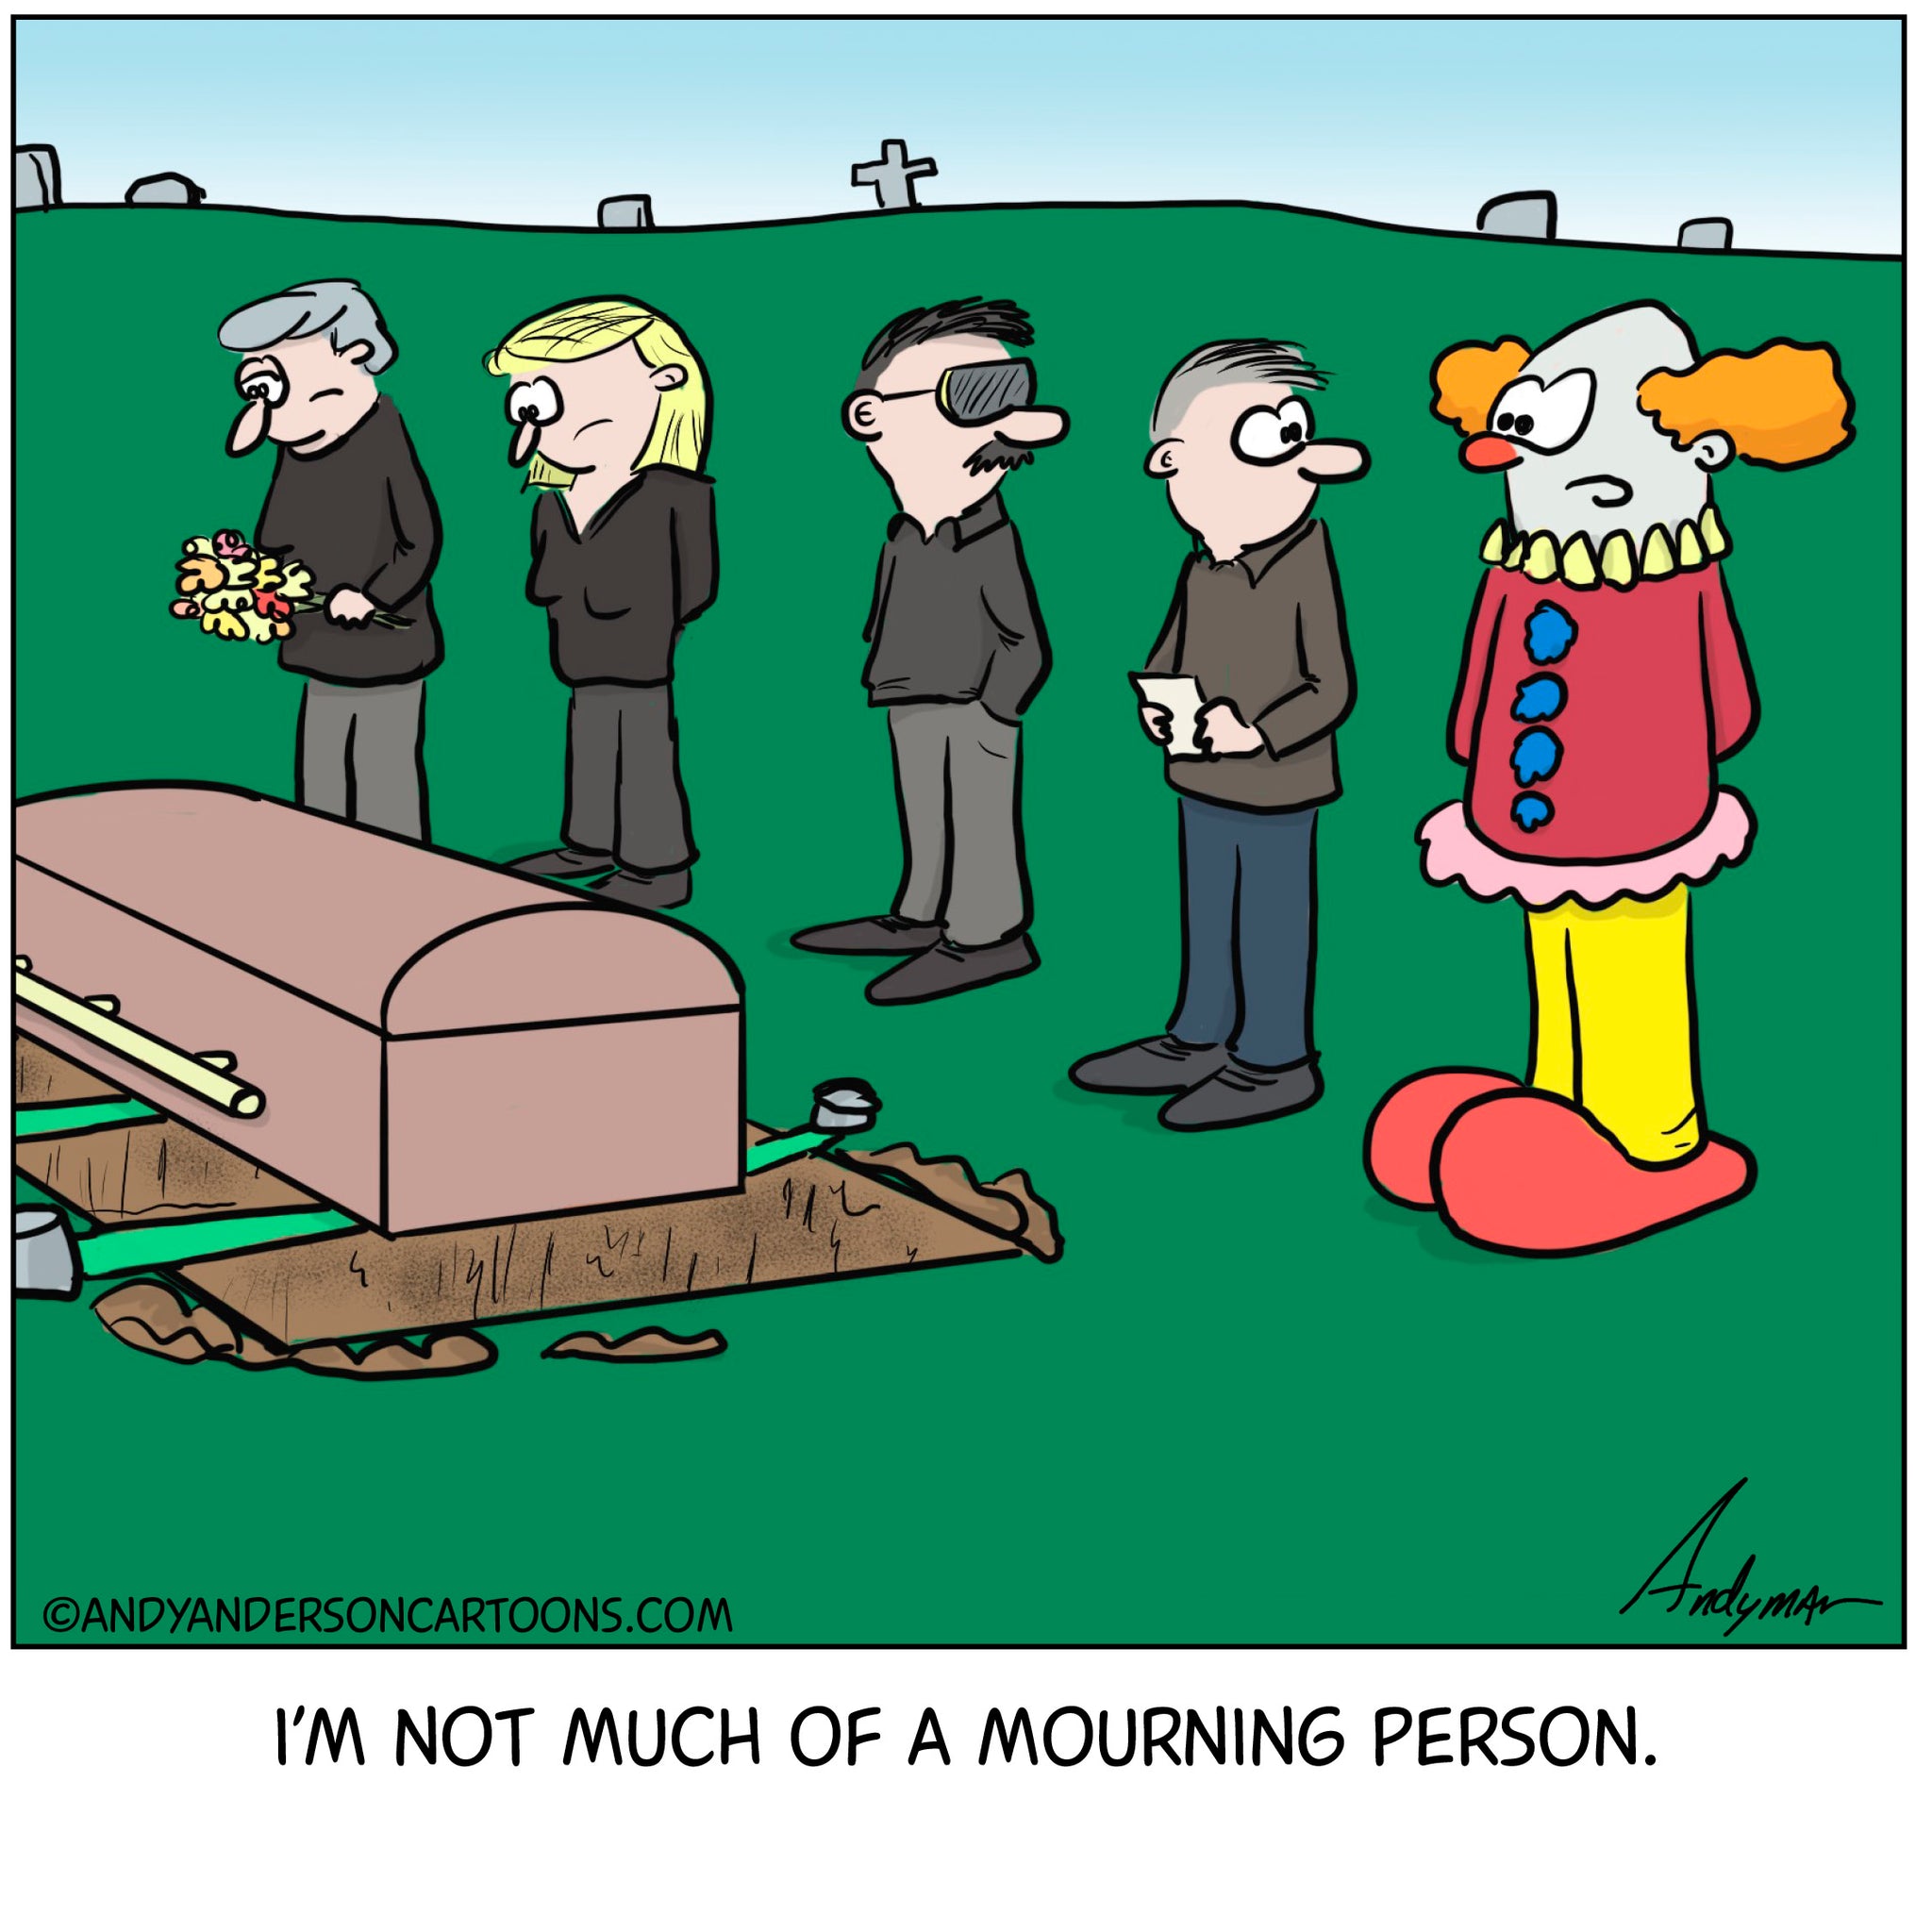 Mourning person cartoon